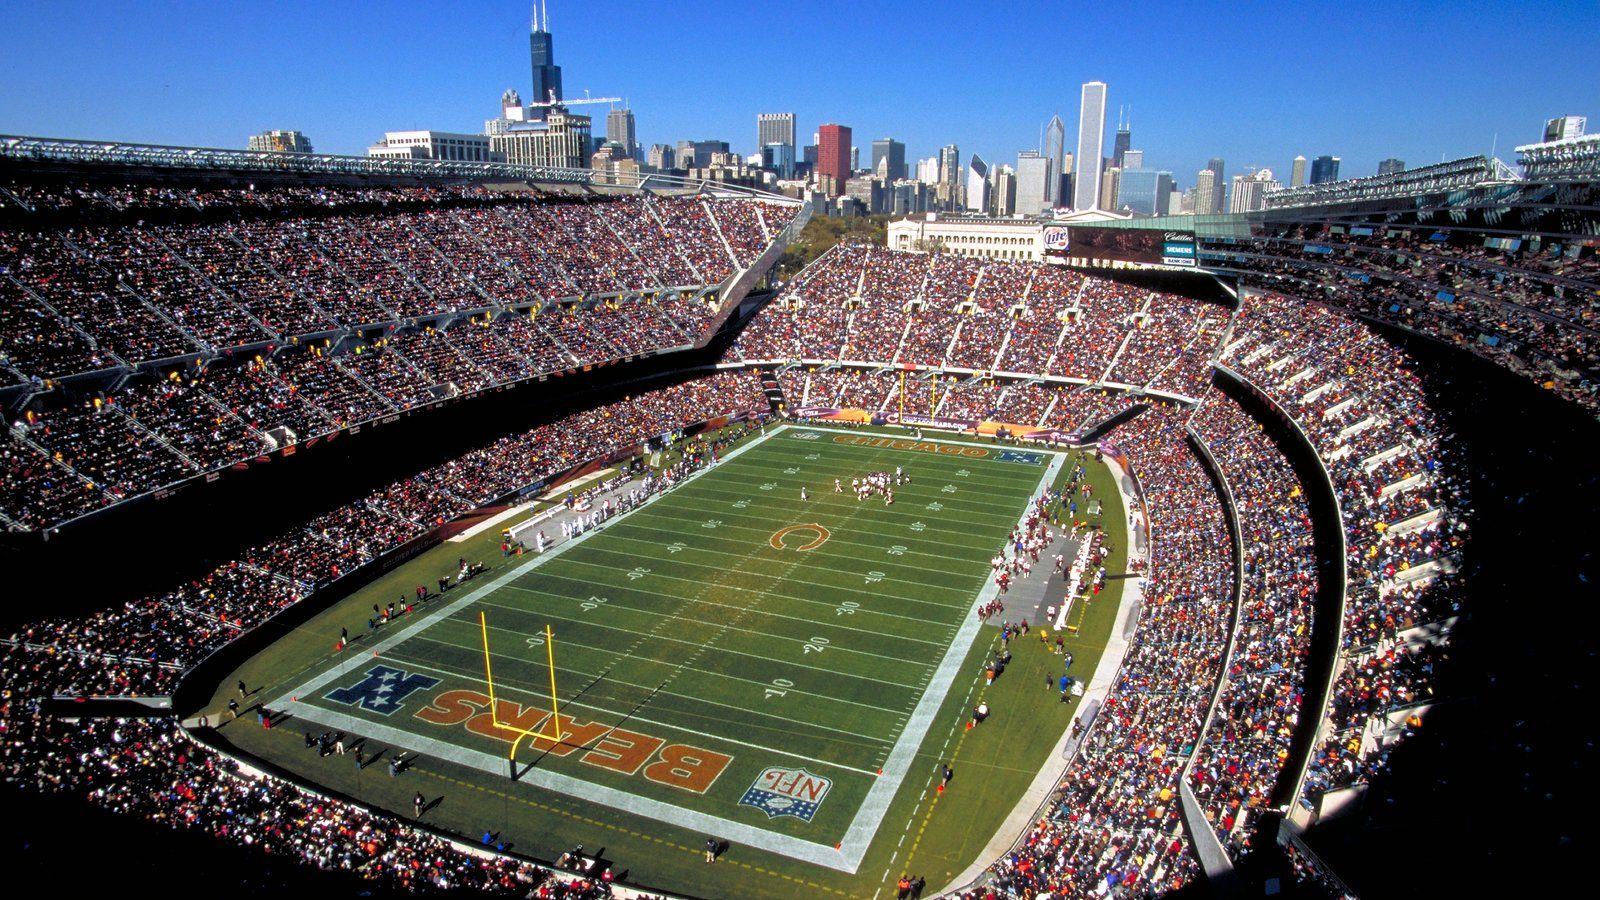 Attraction Picture: View Image of Soldier Field